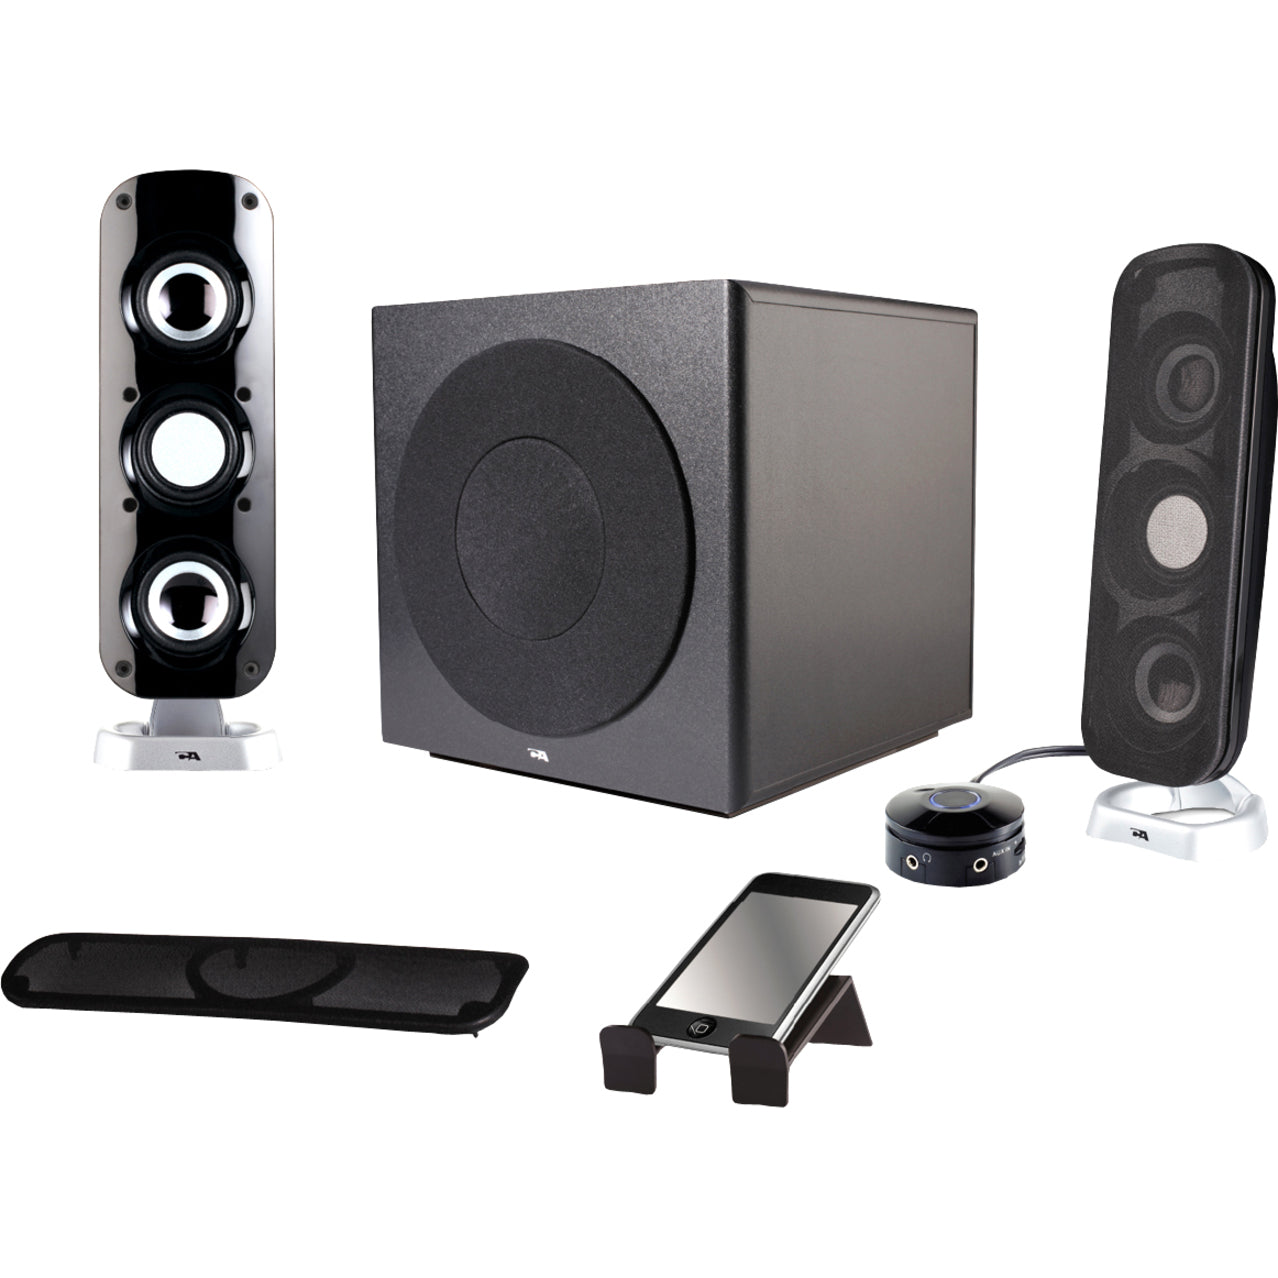 Cyber Acoustics CA-3908 2.1 Speaker System, 46W RMS, iPod Supported